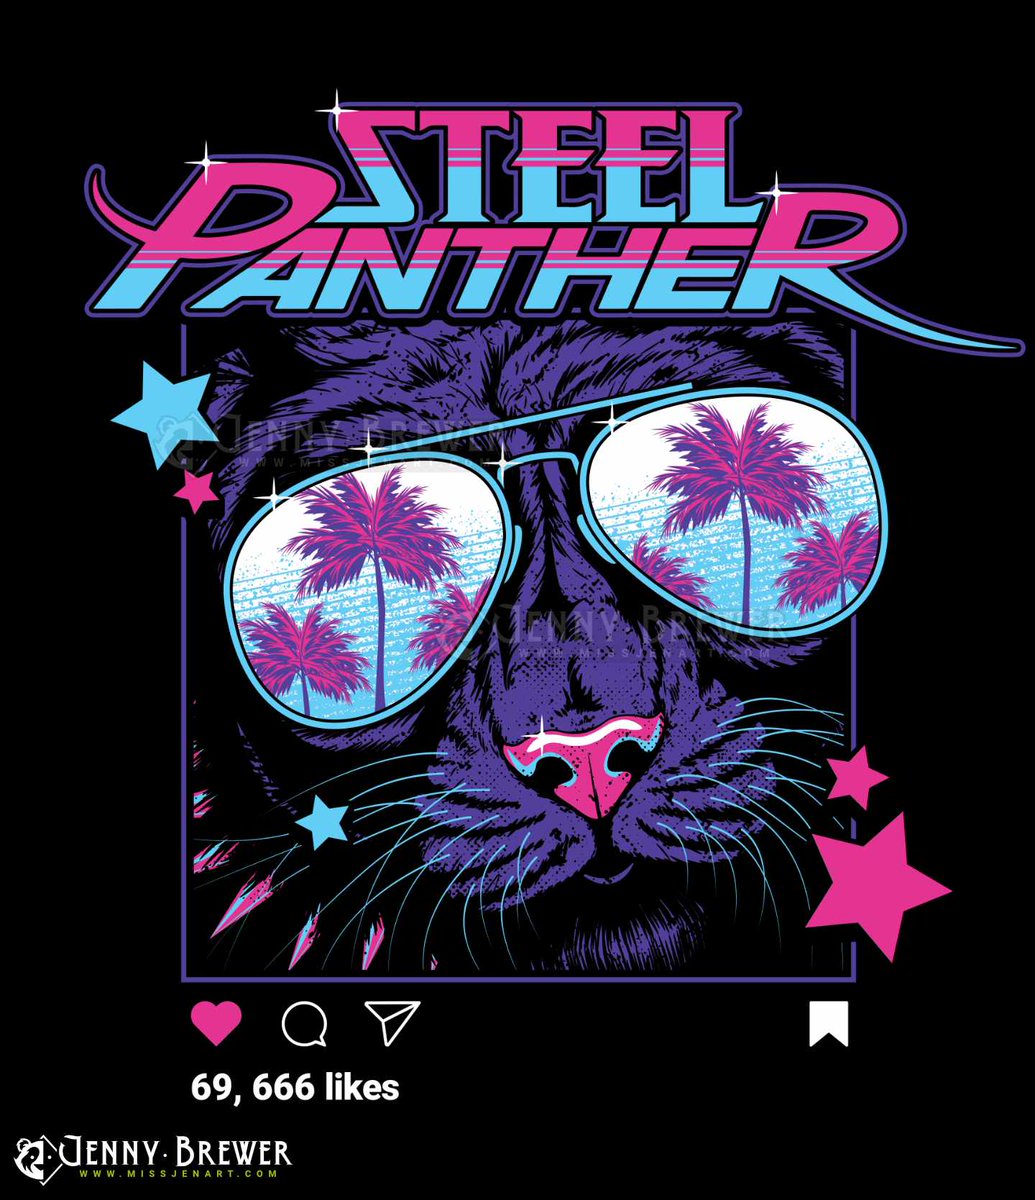 Illustration created for my favourite band, @Steel_Panther ! Available now as T-shirts, Vests, Beach Towels and Koozies at steelpanther.com

What a dream come true, thank you fellas! 
#steelpanther #OnTheProwl #merch #merchdesign #illustration #metal #panther